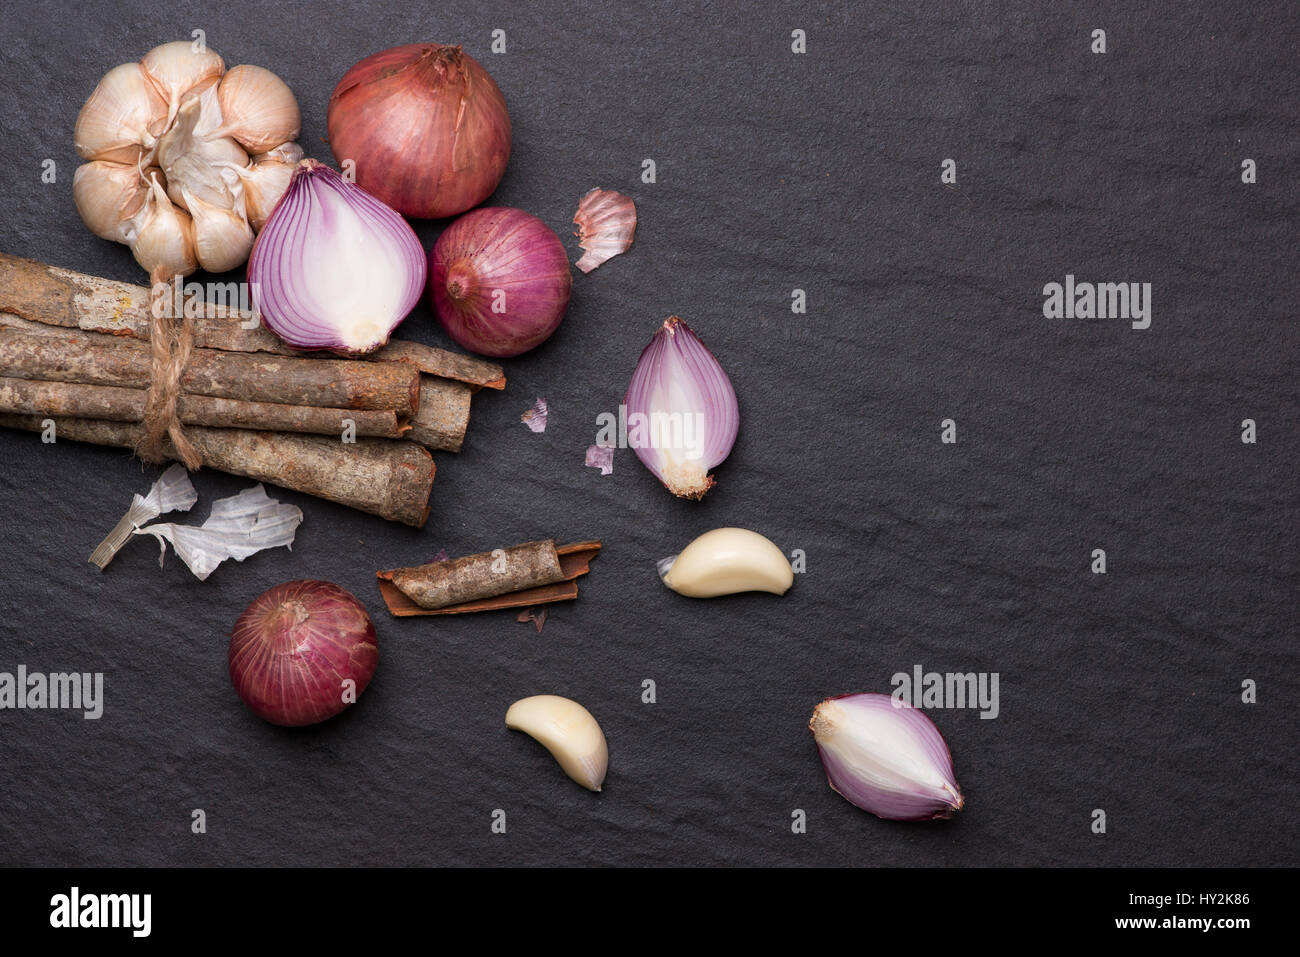 Cooking ingredients: cinnamon sticks and garlic on black stone table. Stock Photo